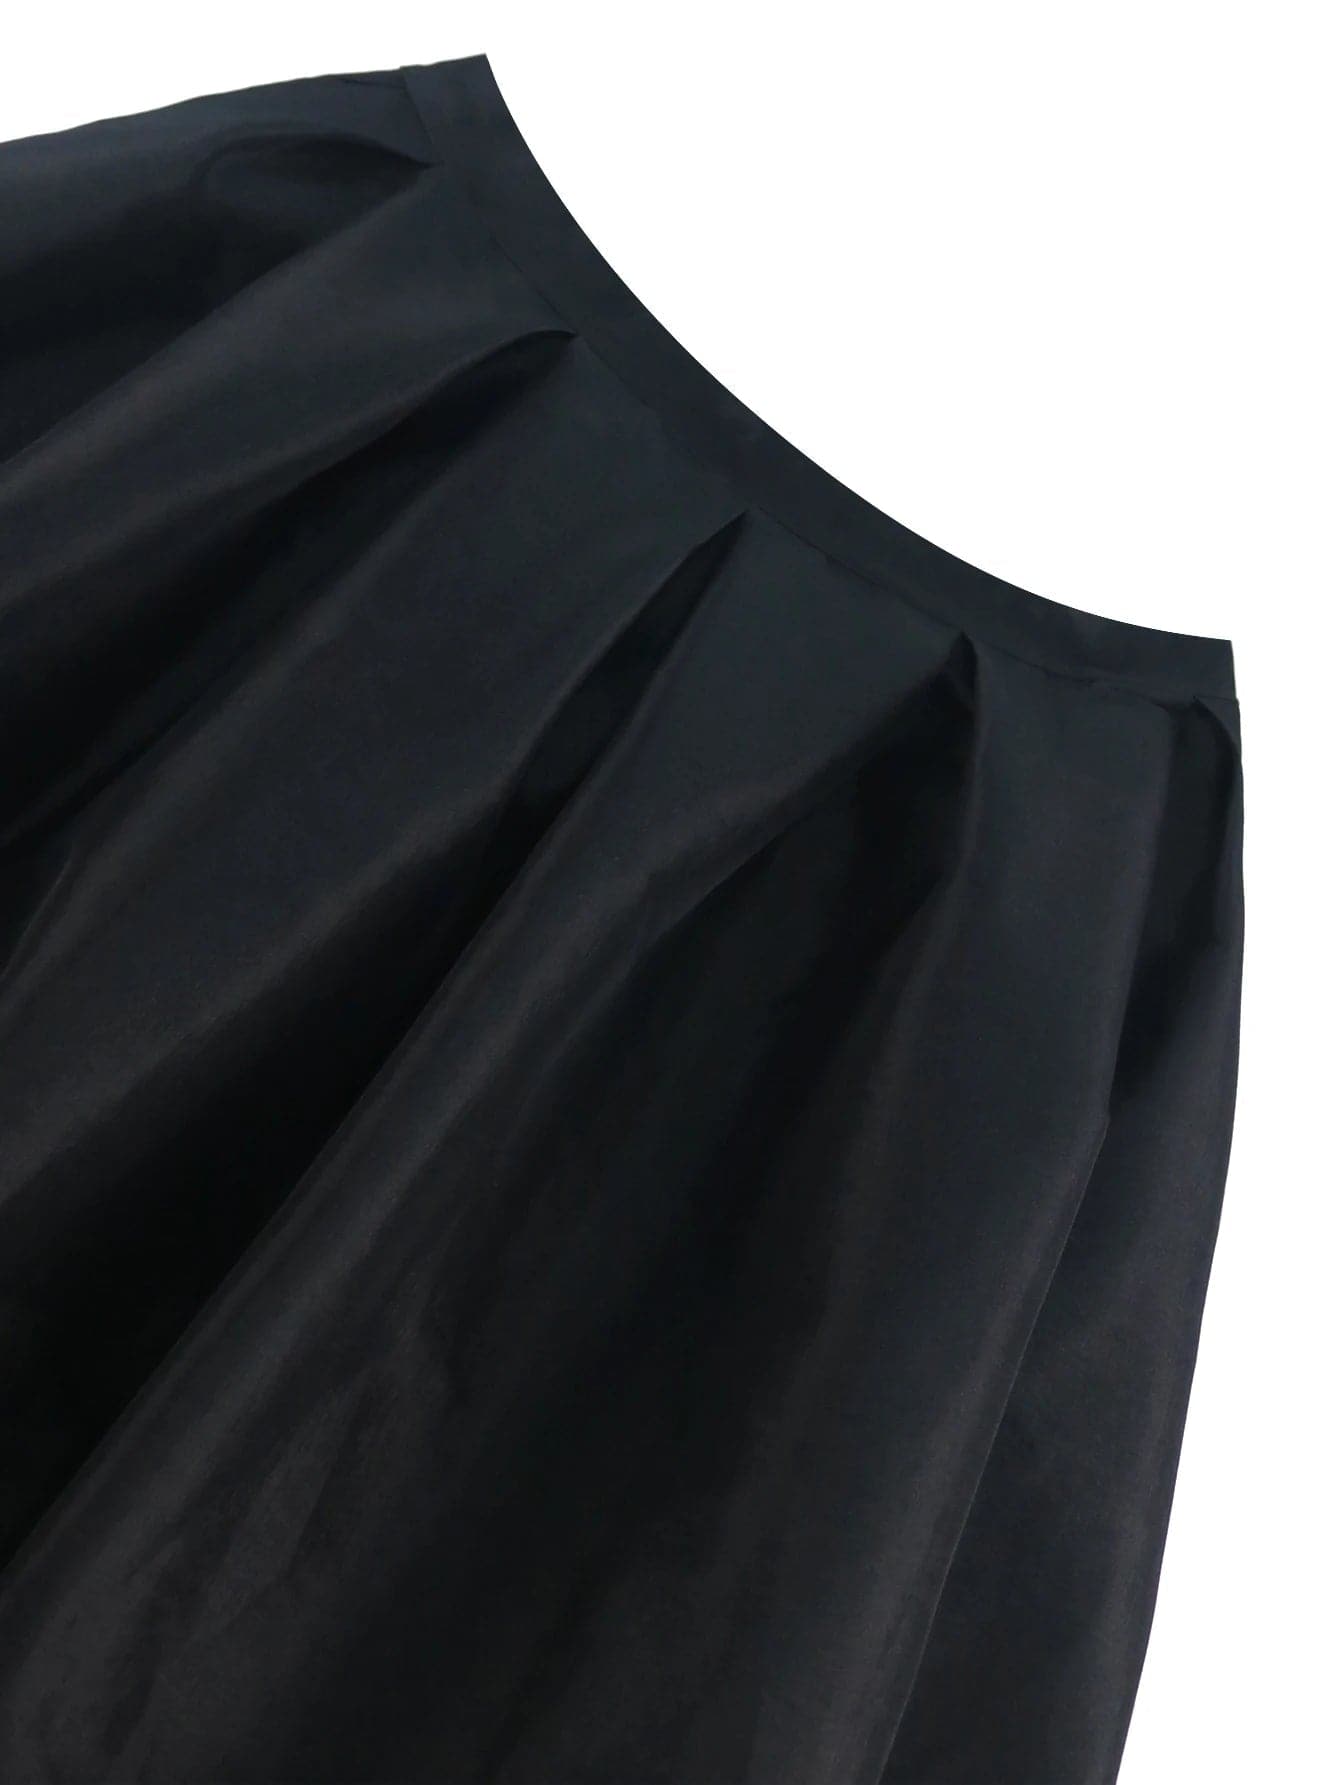 Black Party Skirts - Wandering Woman